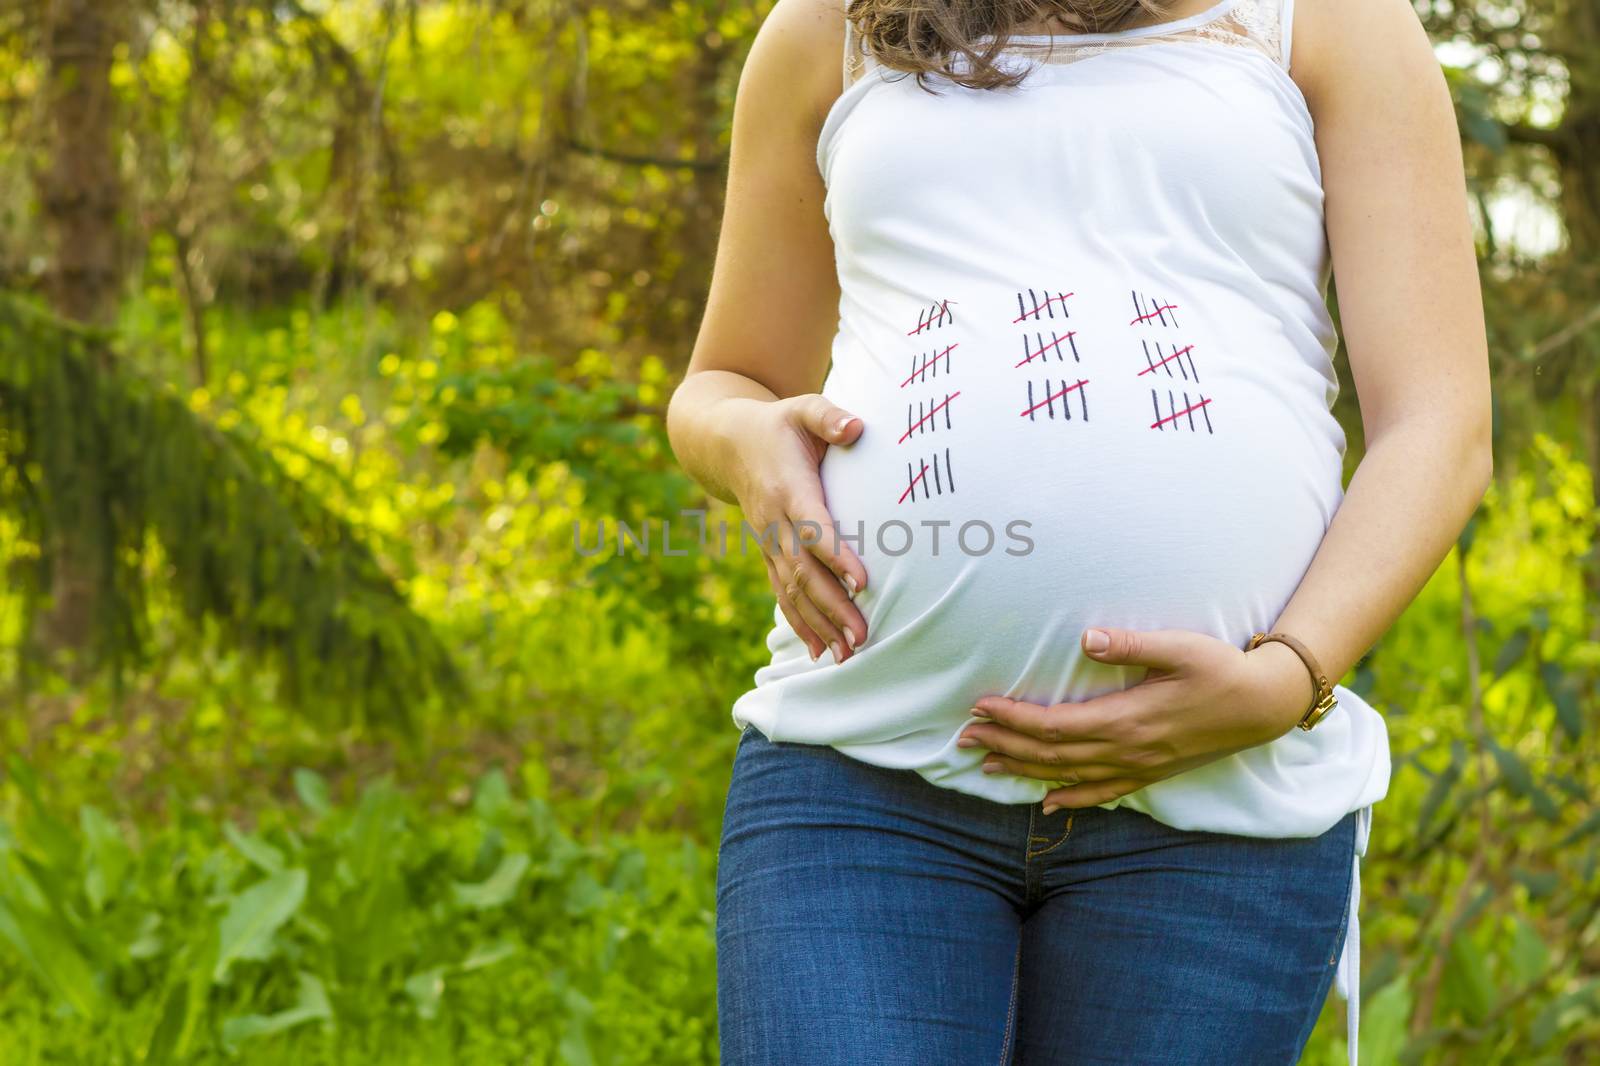 Pregnant young woman outdoors in warm summer day by manaemedia